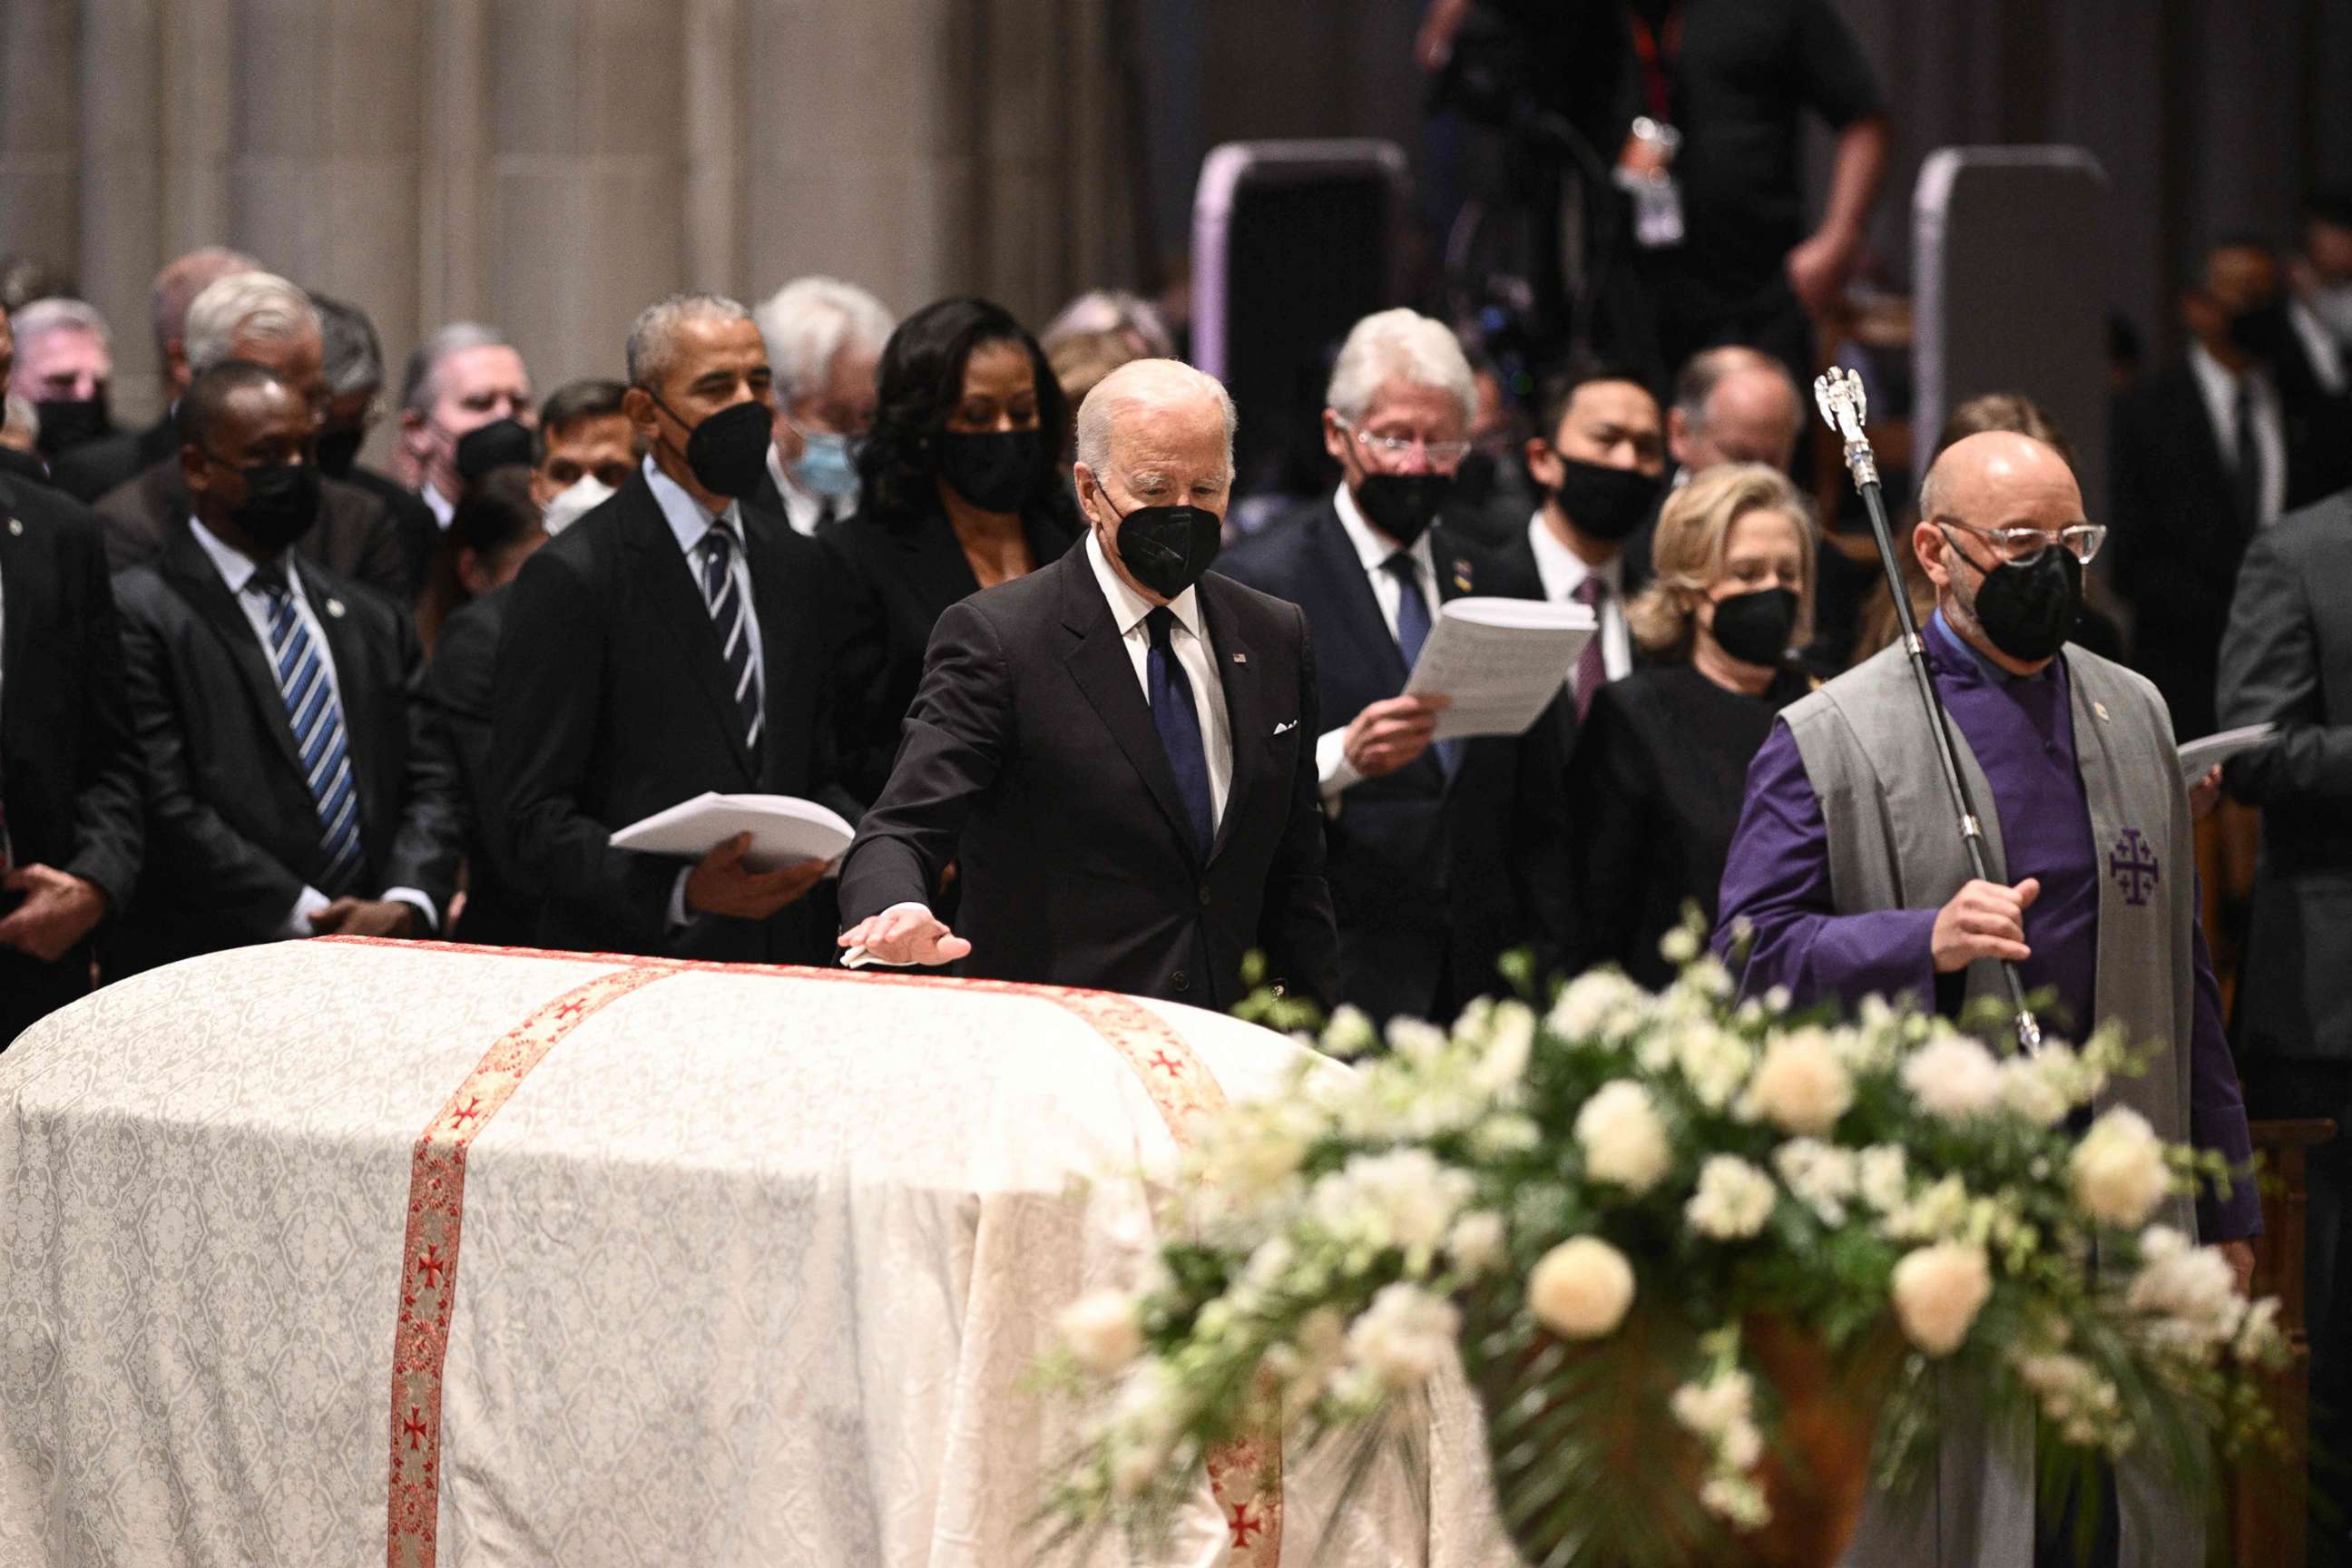 PHOTO: President Joe Biden pays his respects at the casket of former Secretary of State Madeleine Albright during a funeral service at the Washington National Cathedral in Washington, D.C., on April 27, 2022.